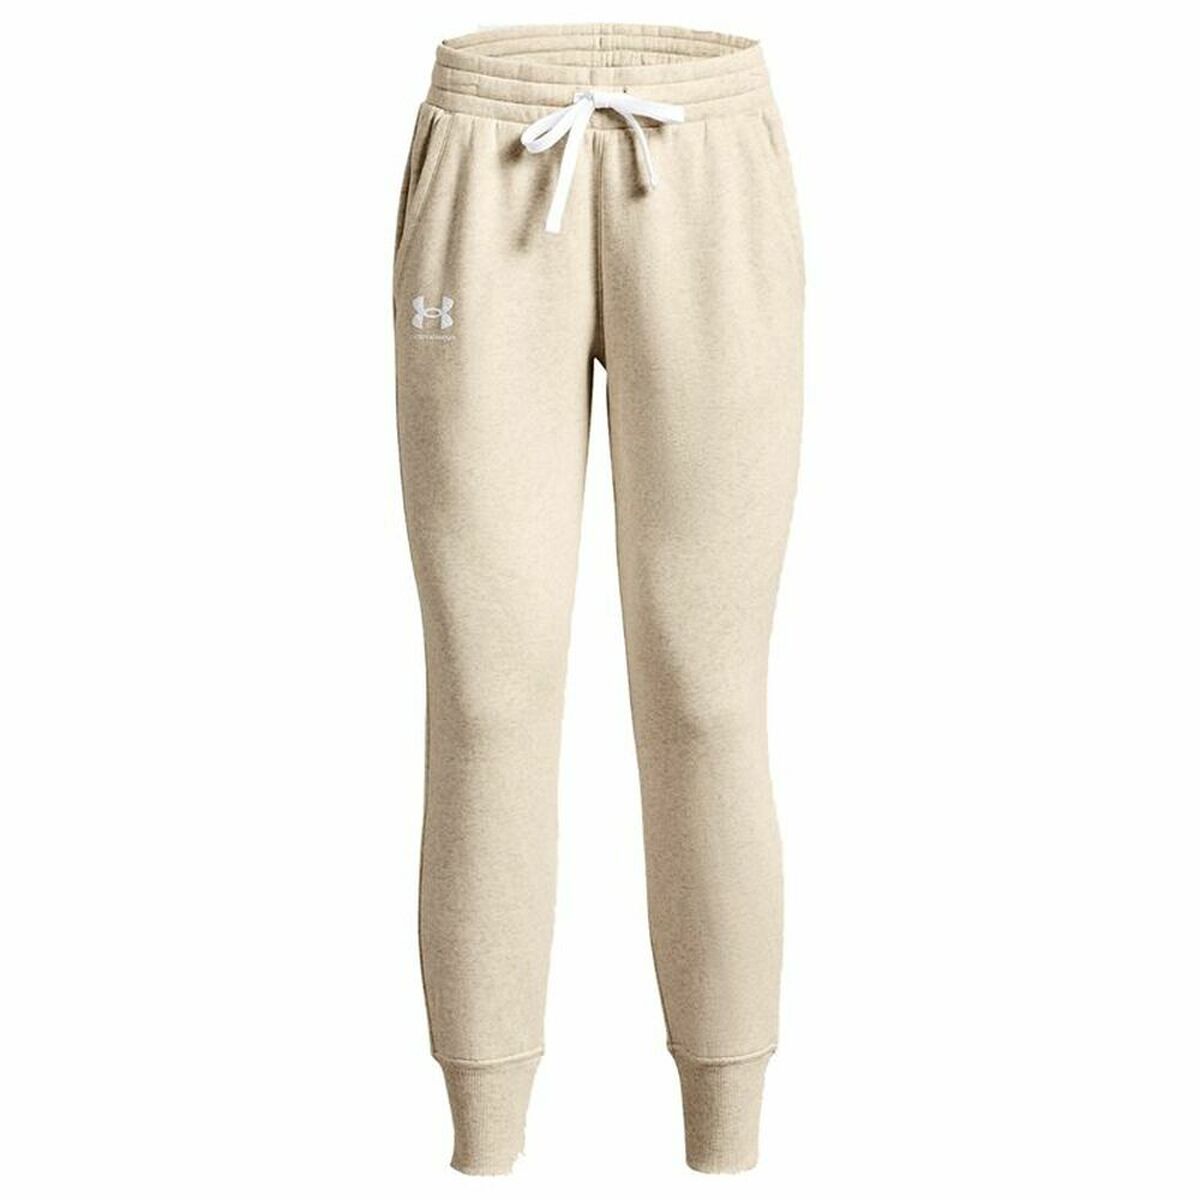 Long Sports Trousers Under Armour Rival Fleece Lady - best prices in  Albania and fast delivery